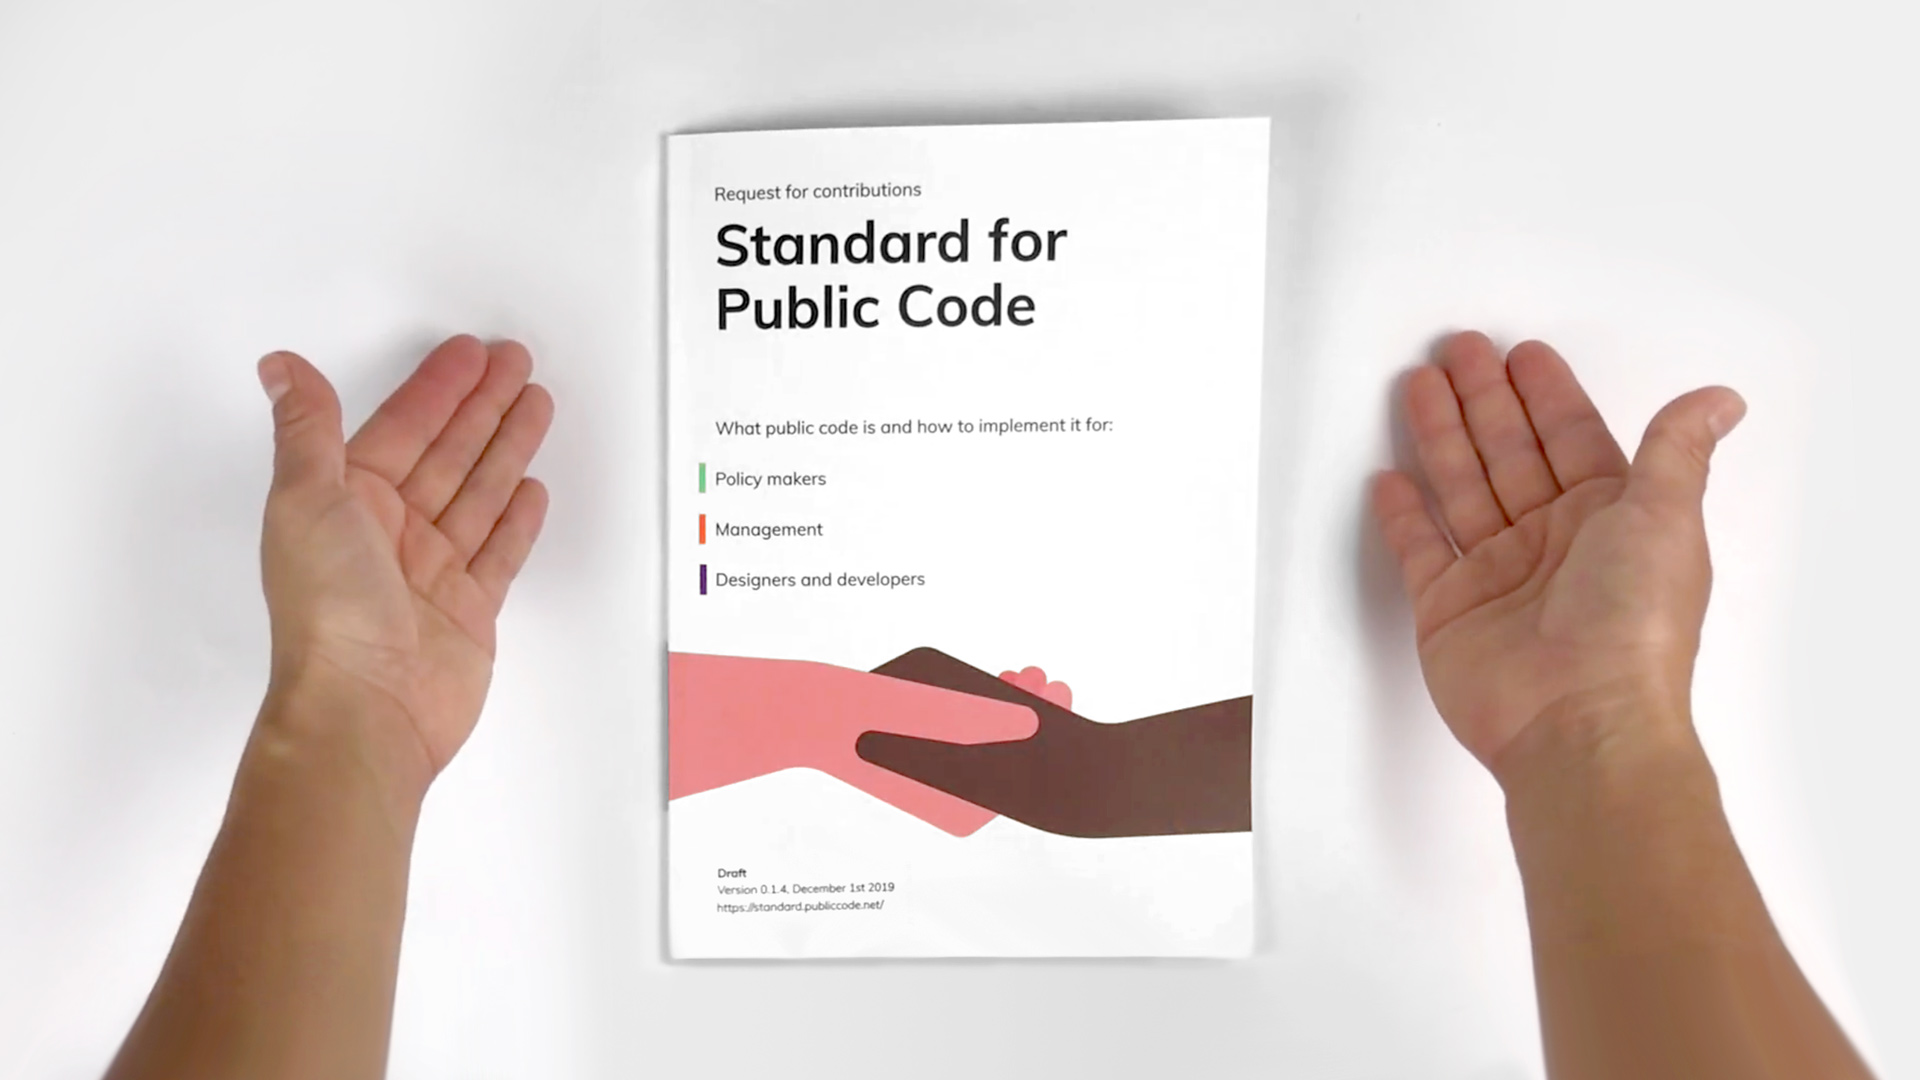 Thumbnail for the video on the Standard for Public Code: a printed version lying on a table between two hands